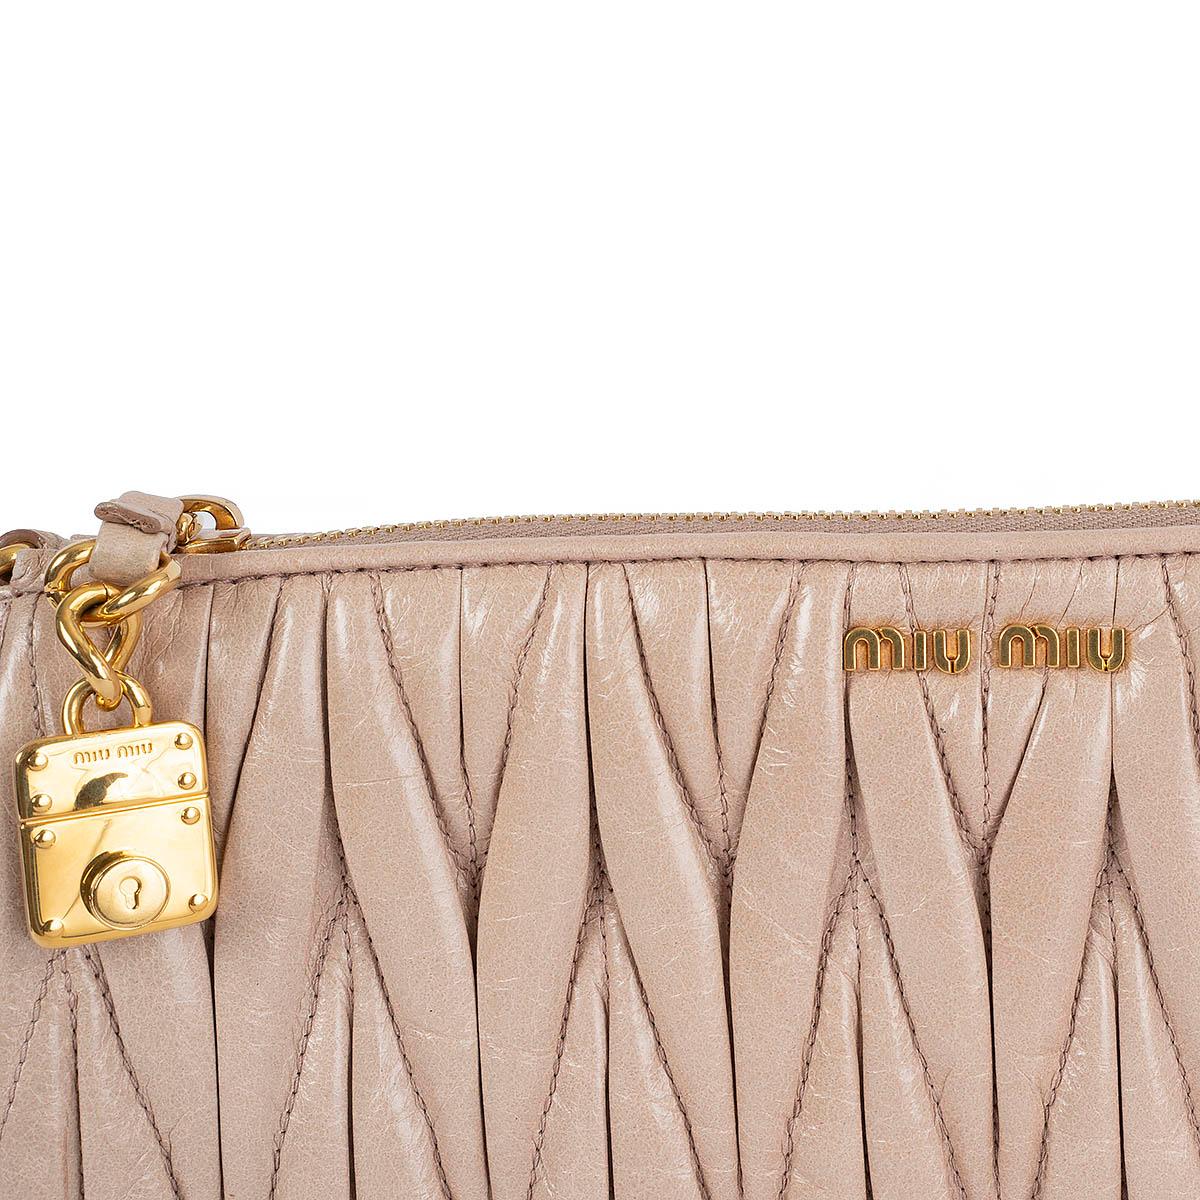 MIU MIU nude pink leather MATELASSE QUILTED Wristlet Clutch Bag For Sale 1